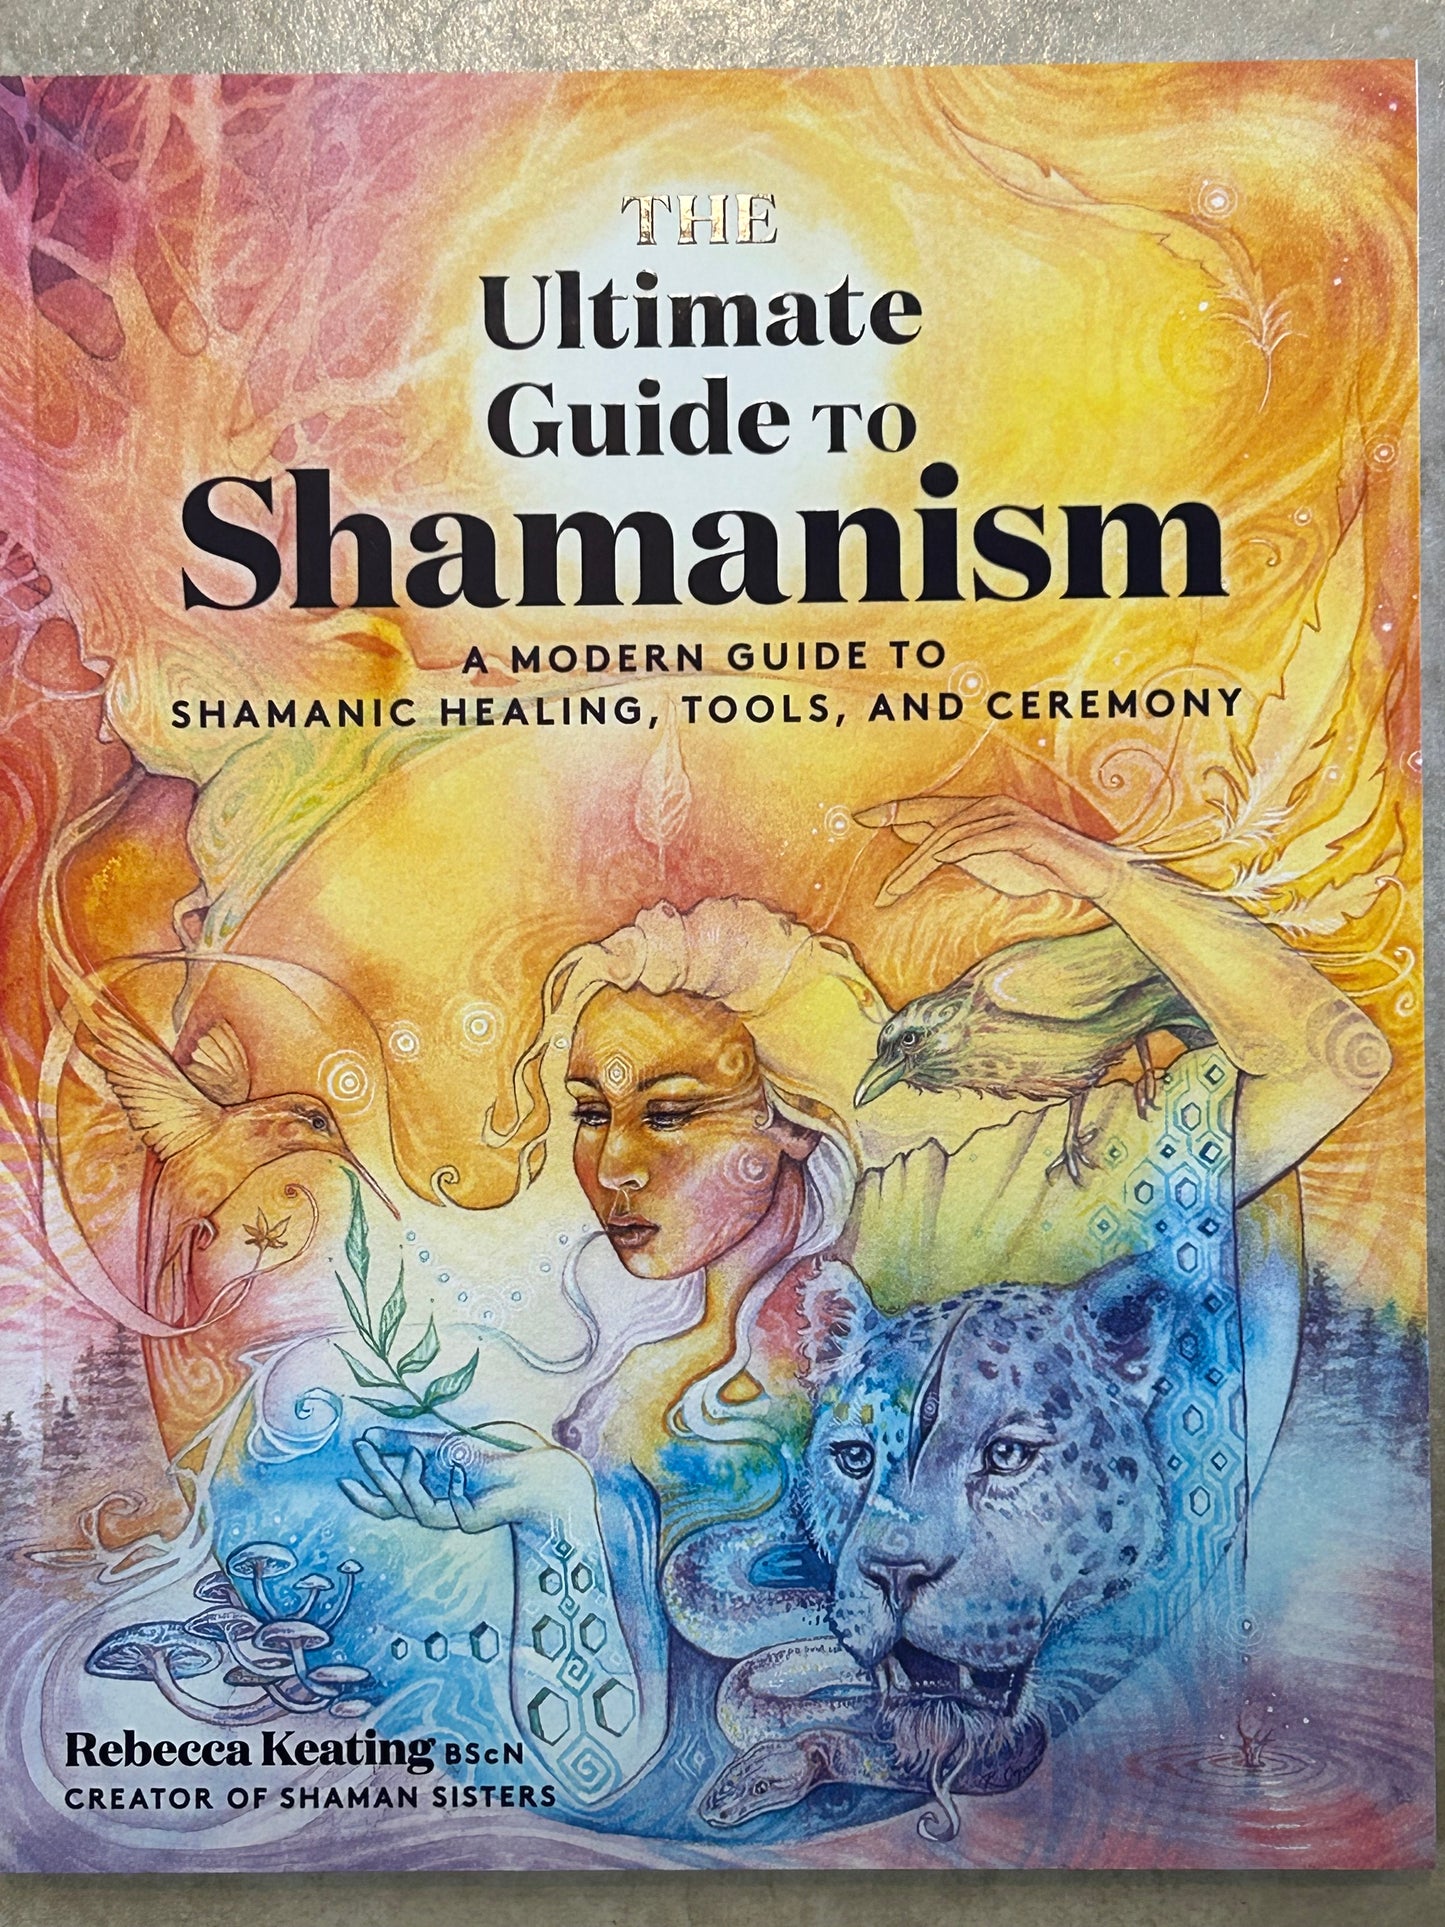 The ultimate guide to shamanism by Rebecca Keating